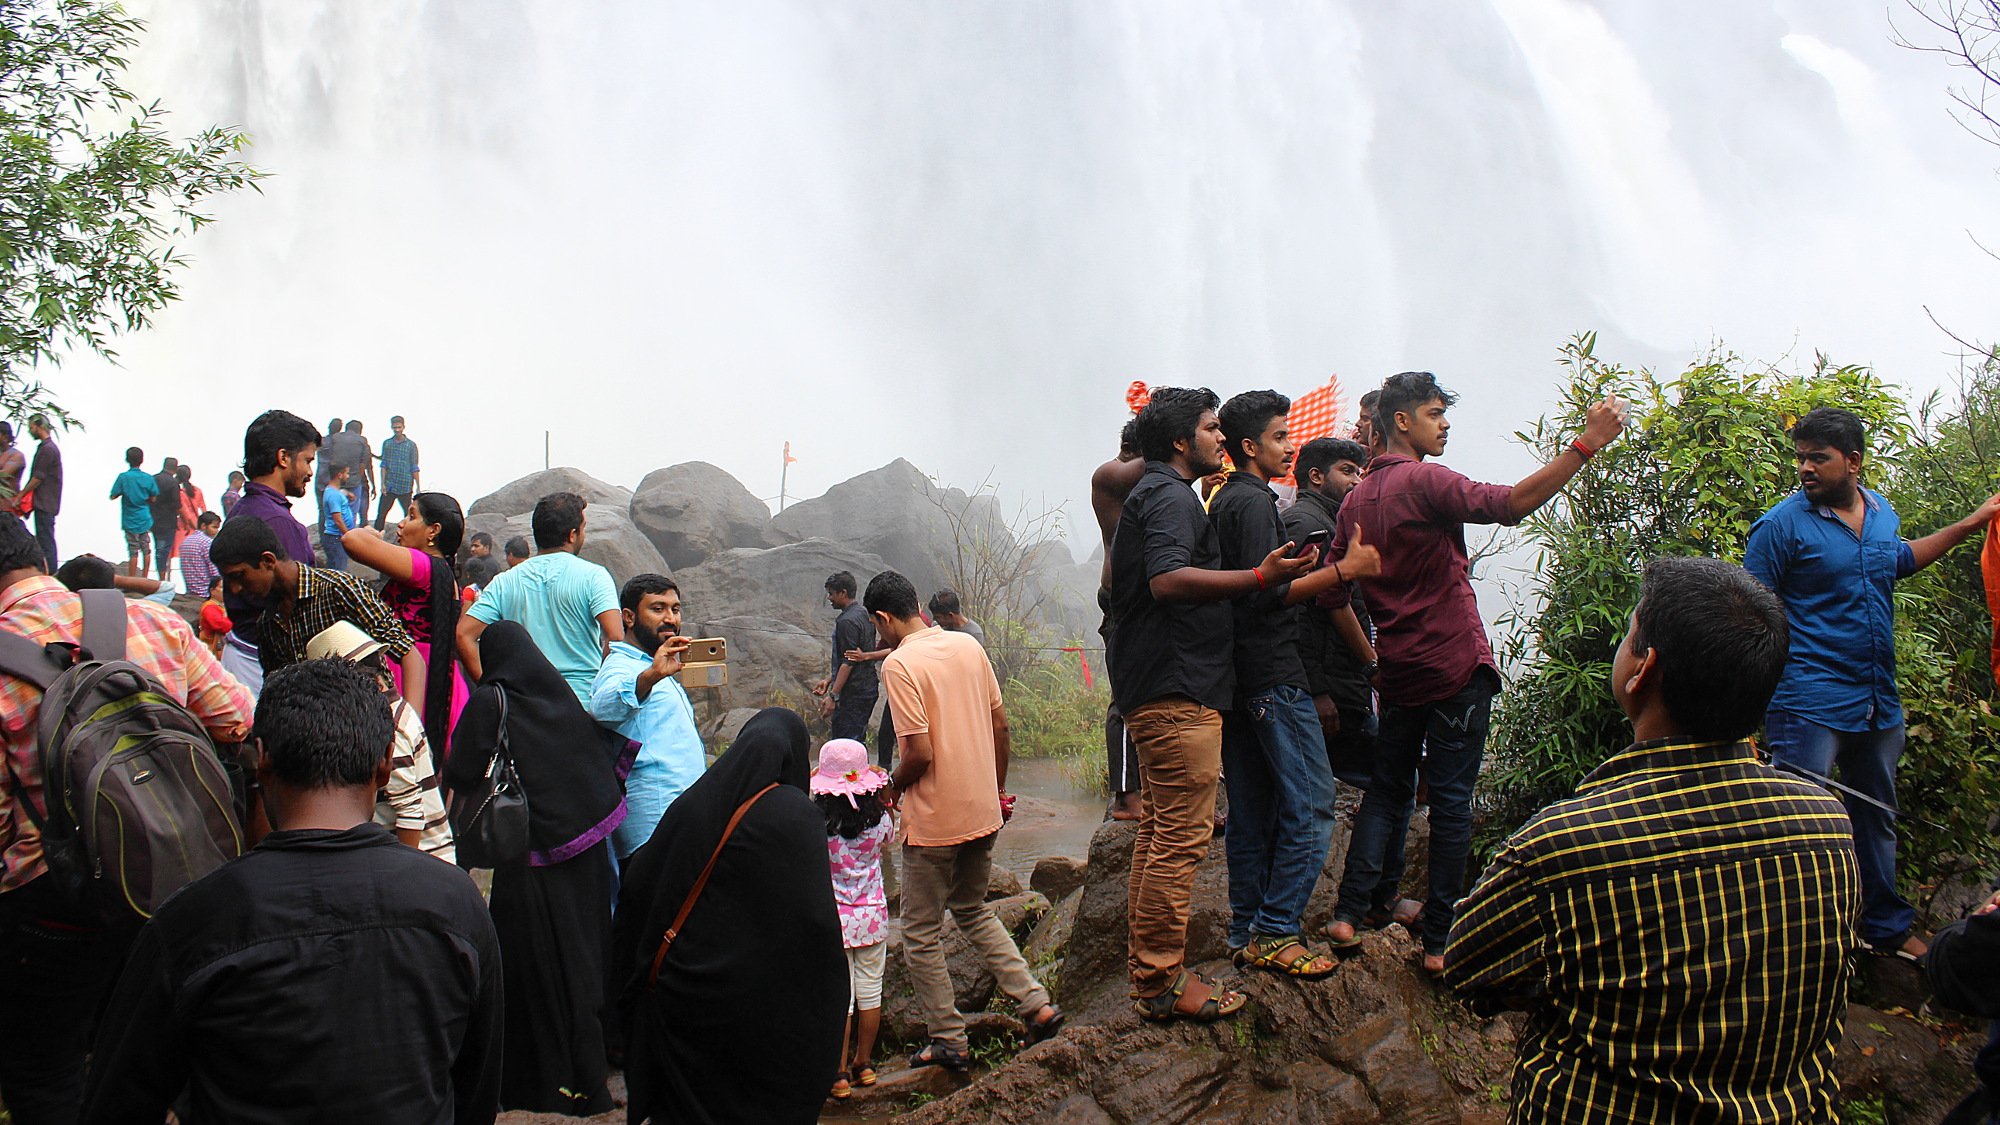 Indian tourists taking selfies below the Athirappilly Falls waterfall.